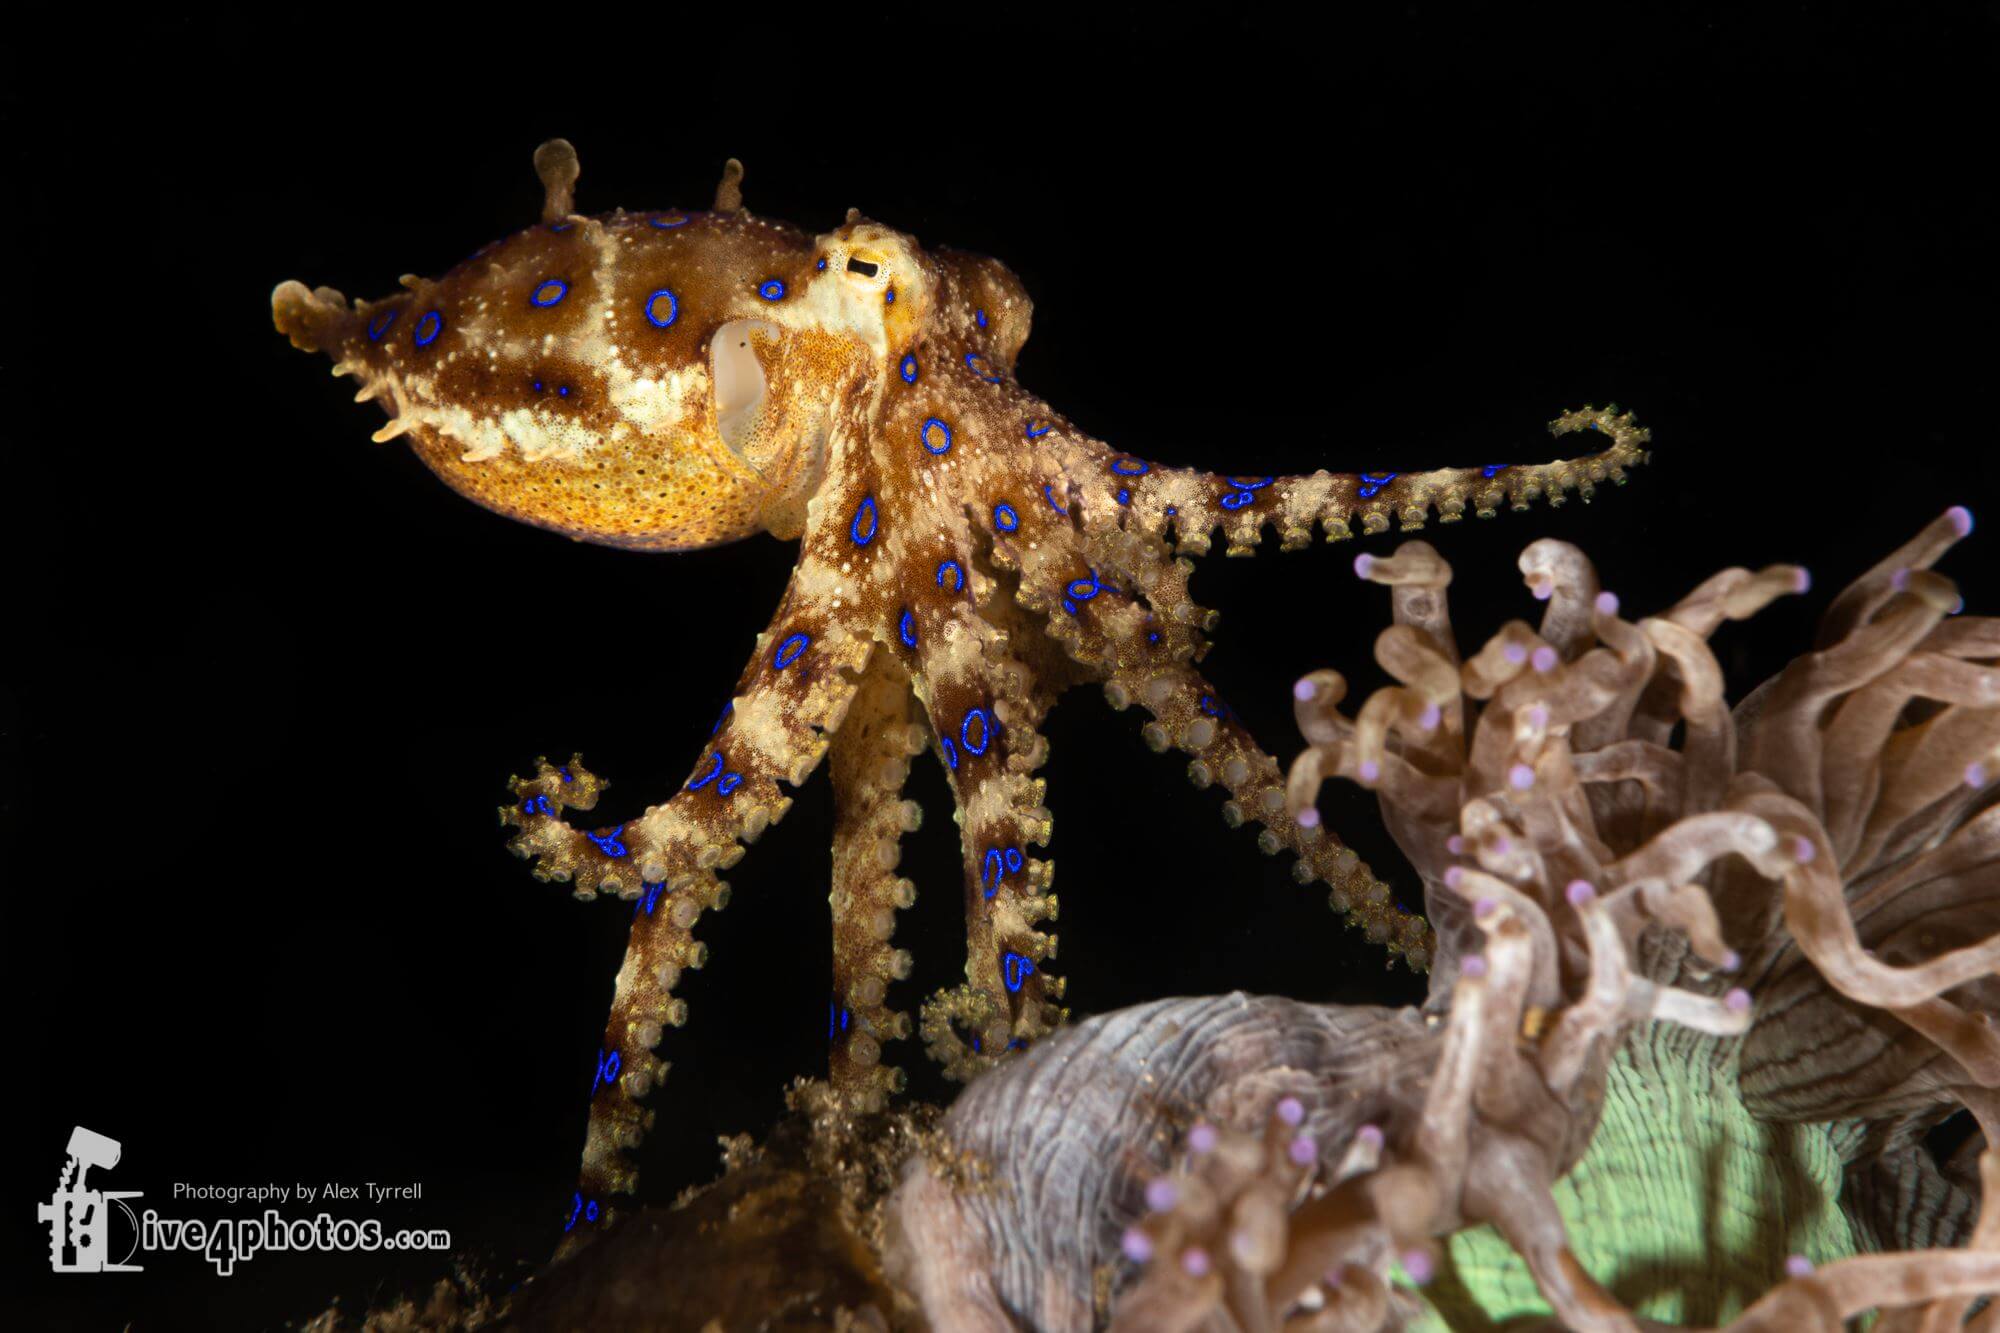 Blue ringed octopus by Alex Tyrrell